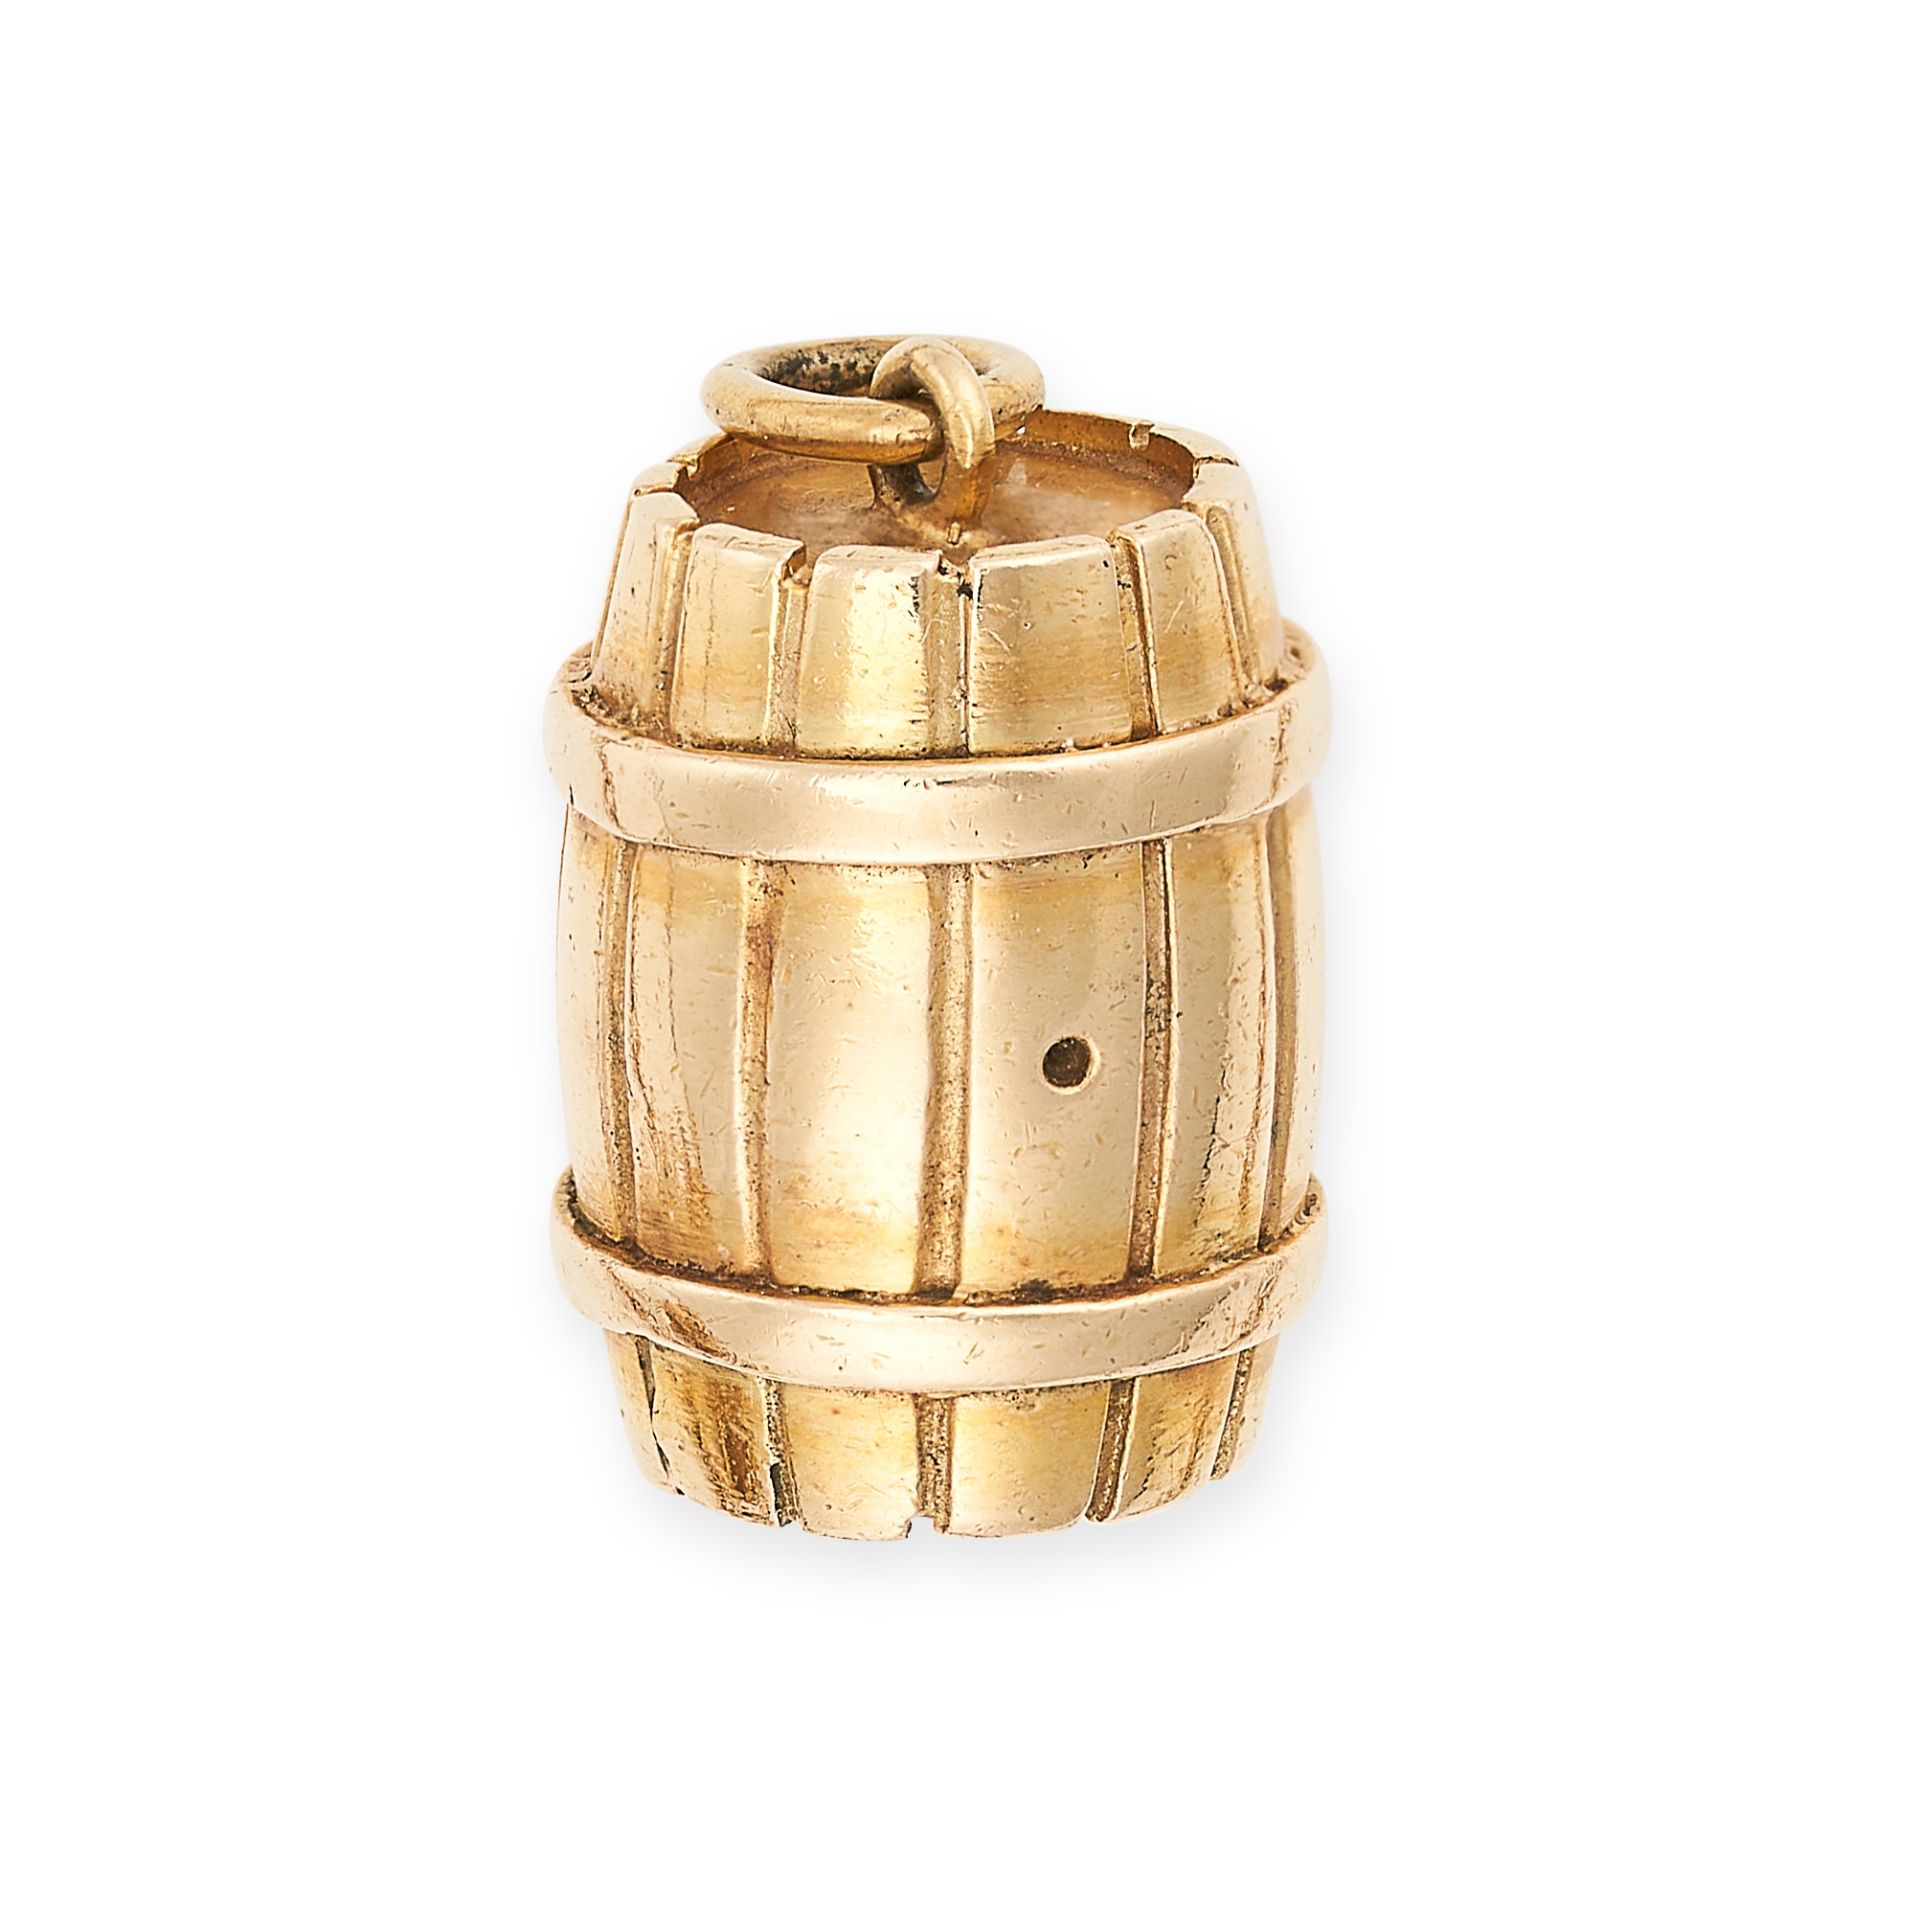 A VINTAGE BARREL CHARM in 9ct yellow gold, designed as an oak whisky barrel, British hallmarks for